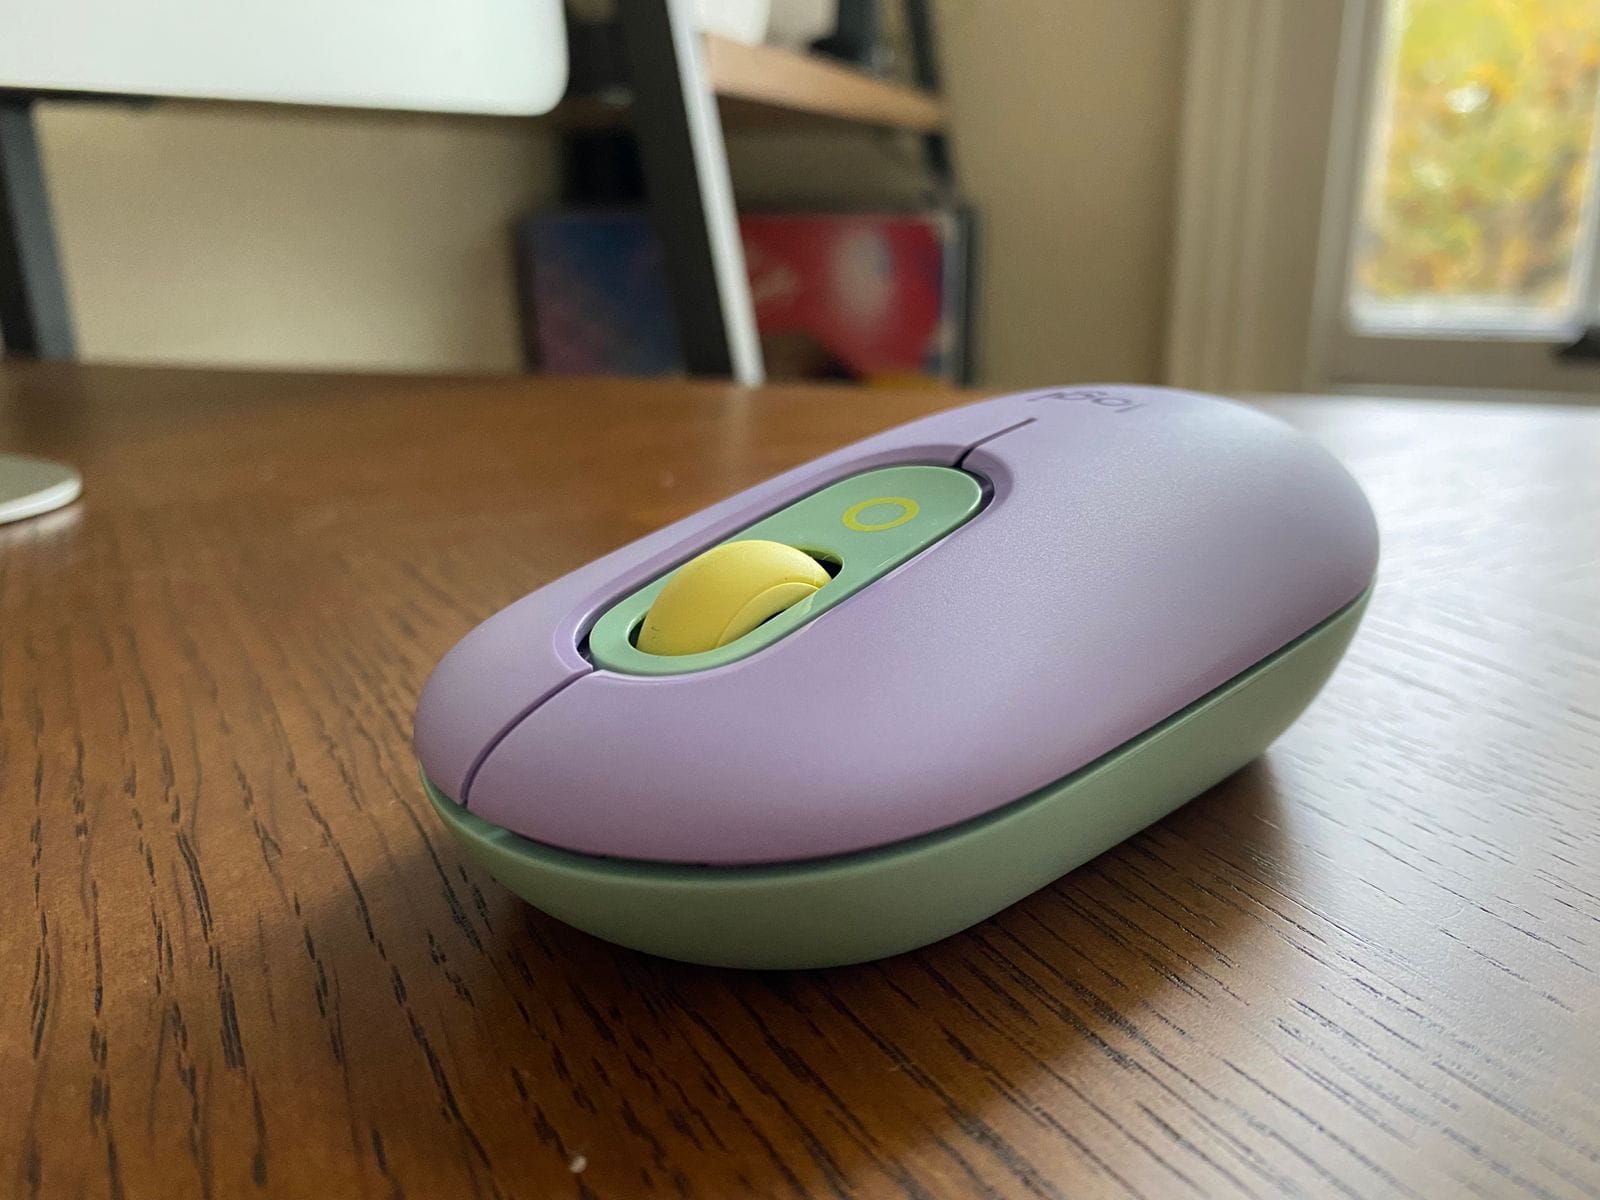 Logitech POP Keys and POP Mouse review: colourful peripherals without a purpose